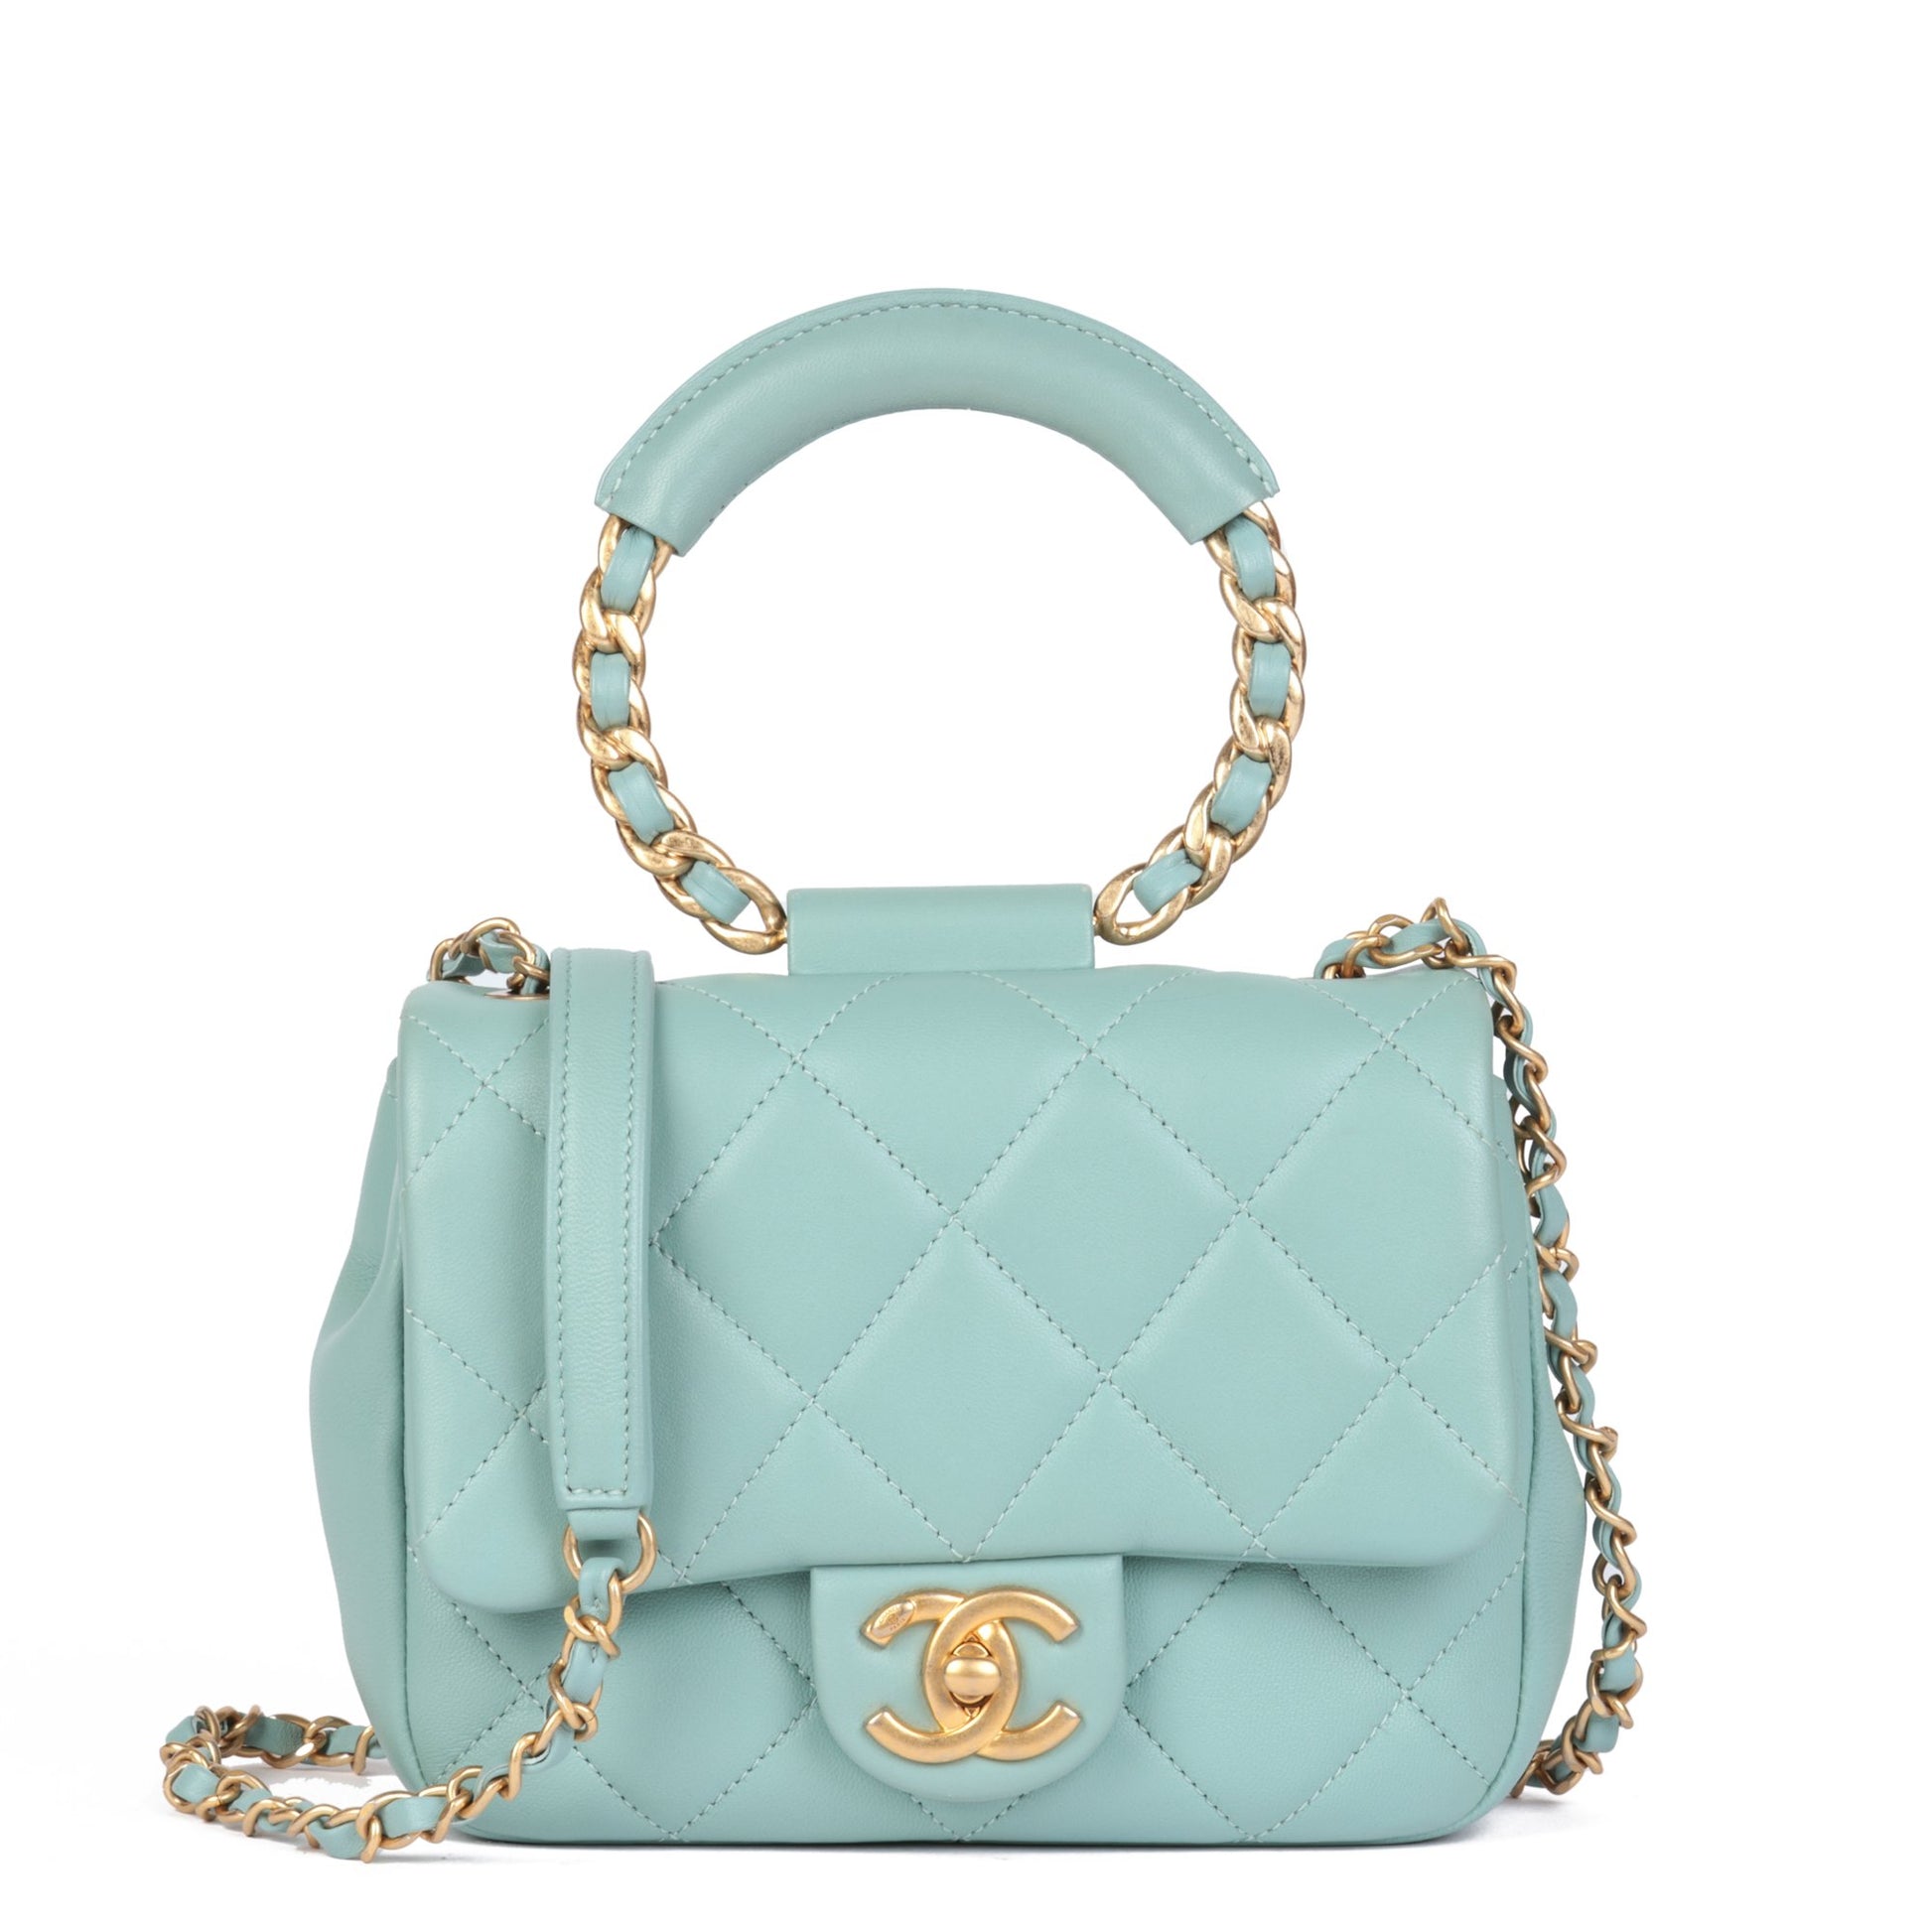 Chanel White Quilted Caviar Mini Chain Around Flap Bag Gold